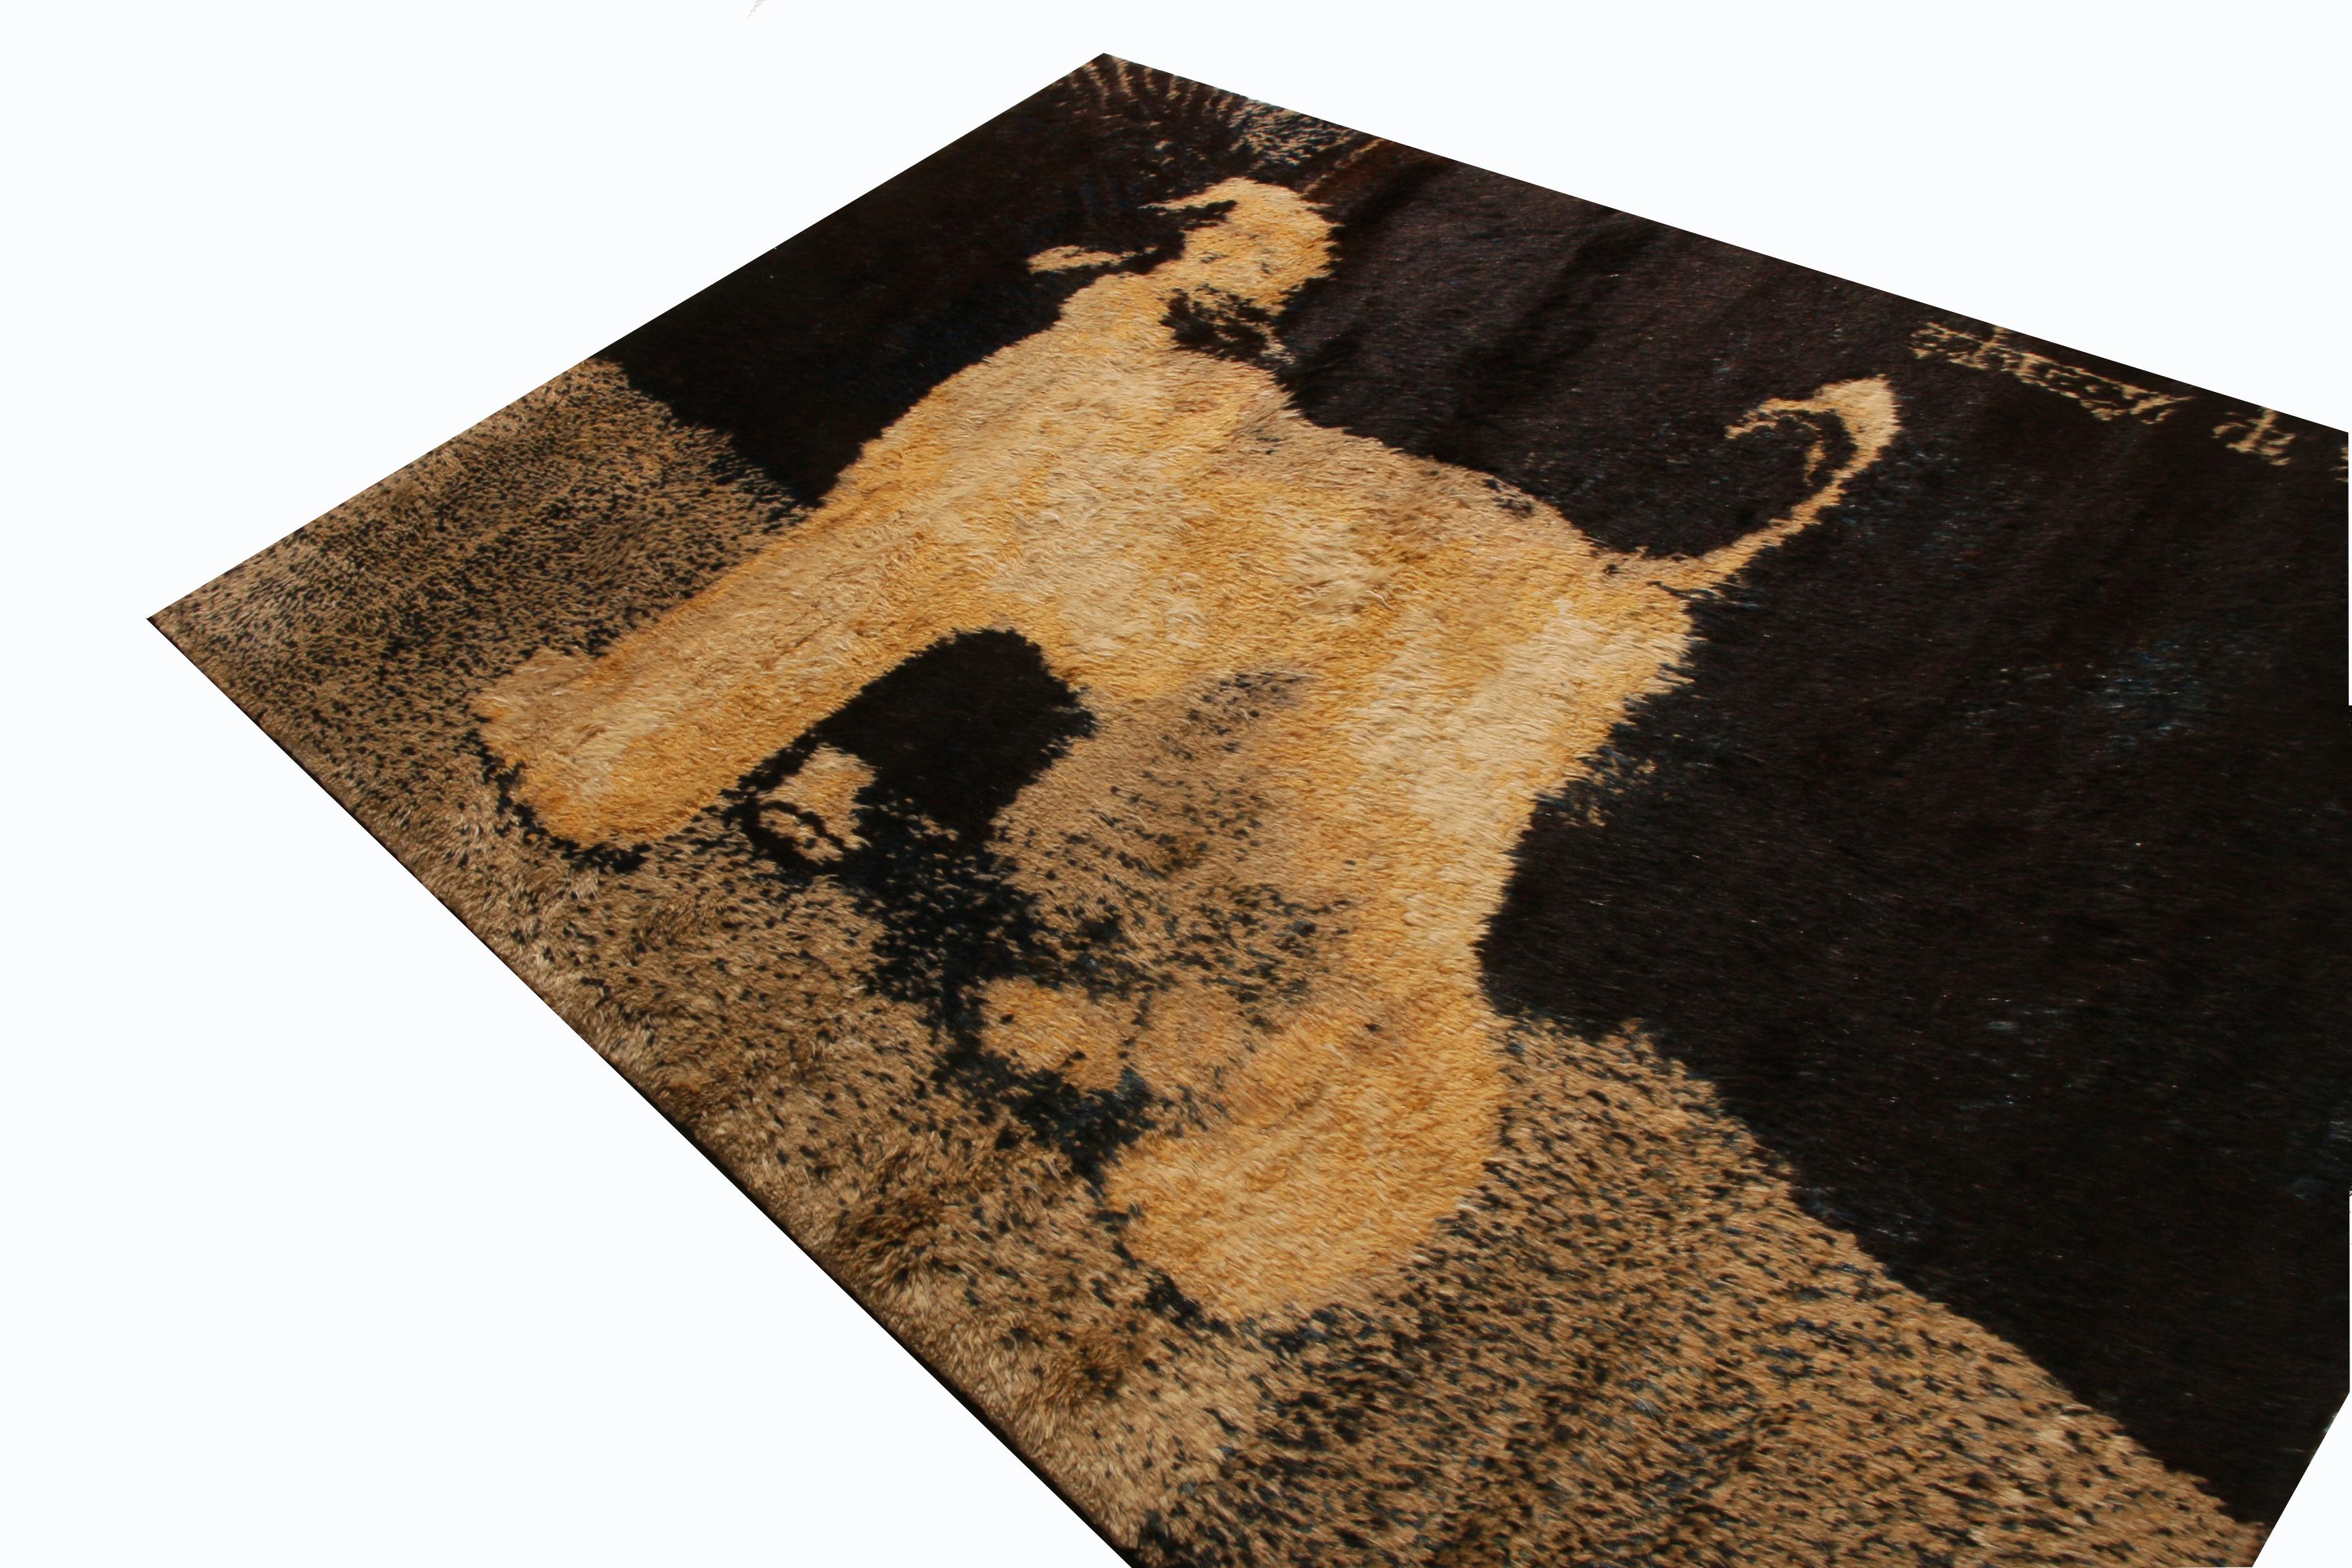 This hand knotted Afghan pictorial rug depicts a finely woven abrash black and gold dog design in silk-like, luminous goat hair. Borderless throughout the field design to the guard, the pictorial dog features brighter, more iridescent golden-yellow